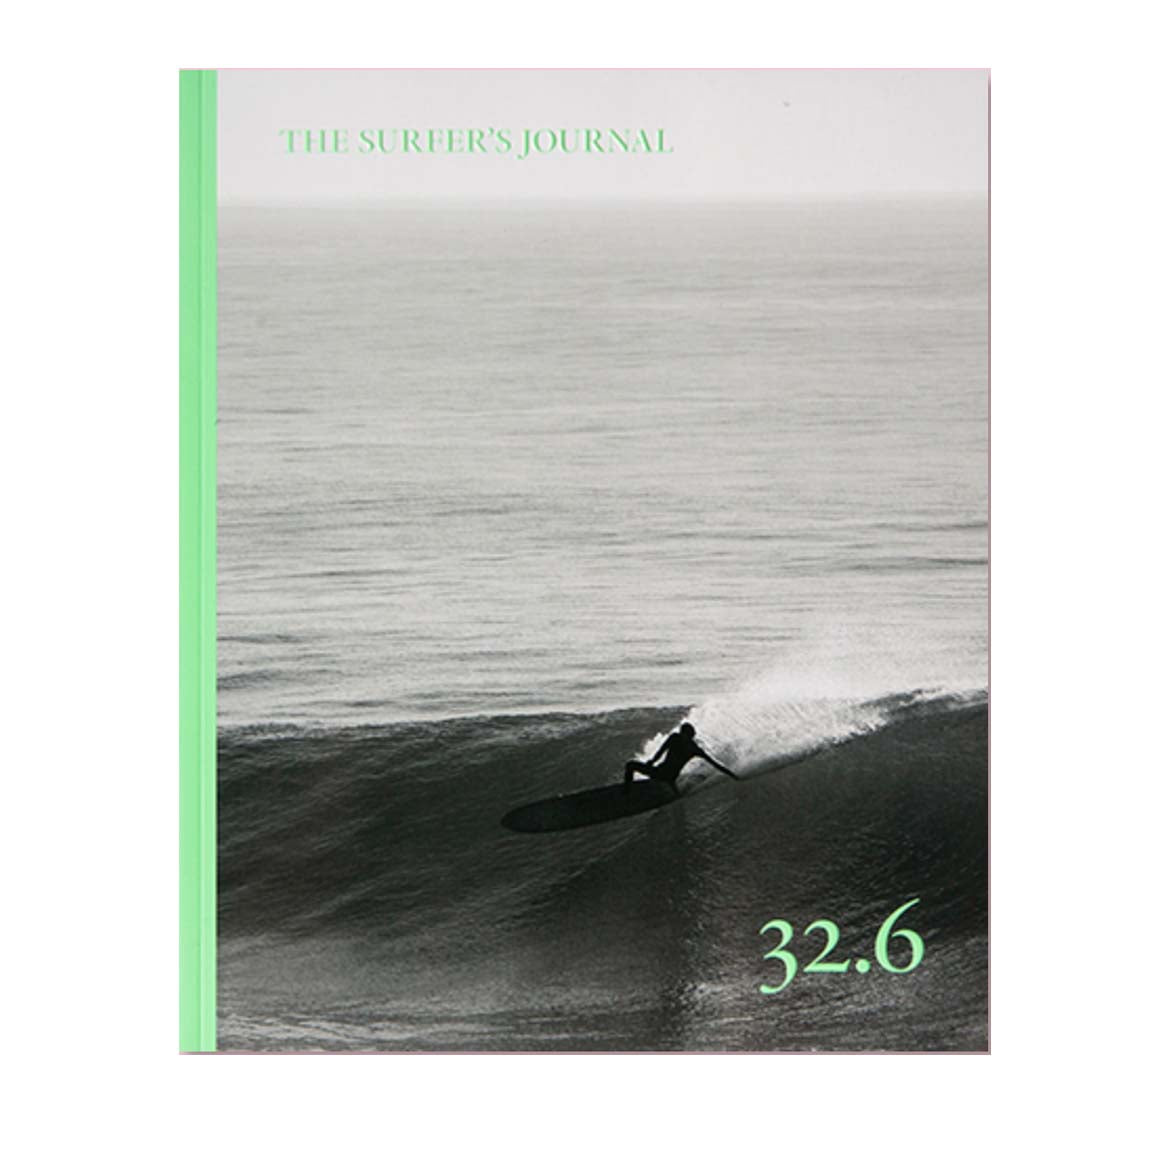 THE SURFER'S JOURNAL - ISSUE 32.6